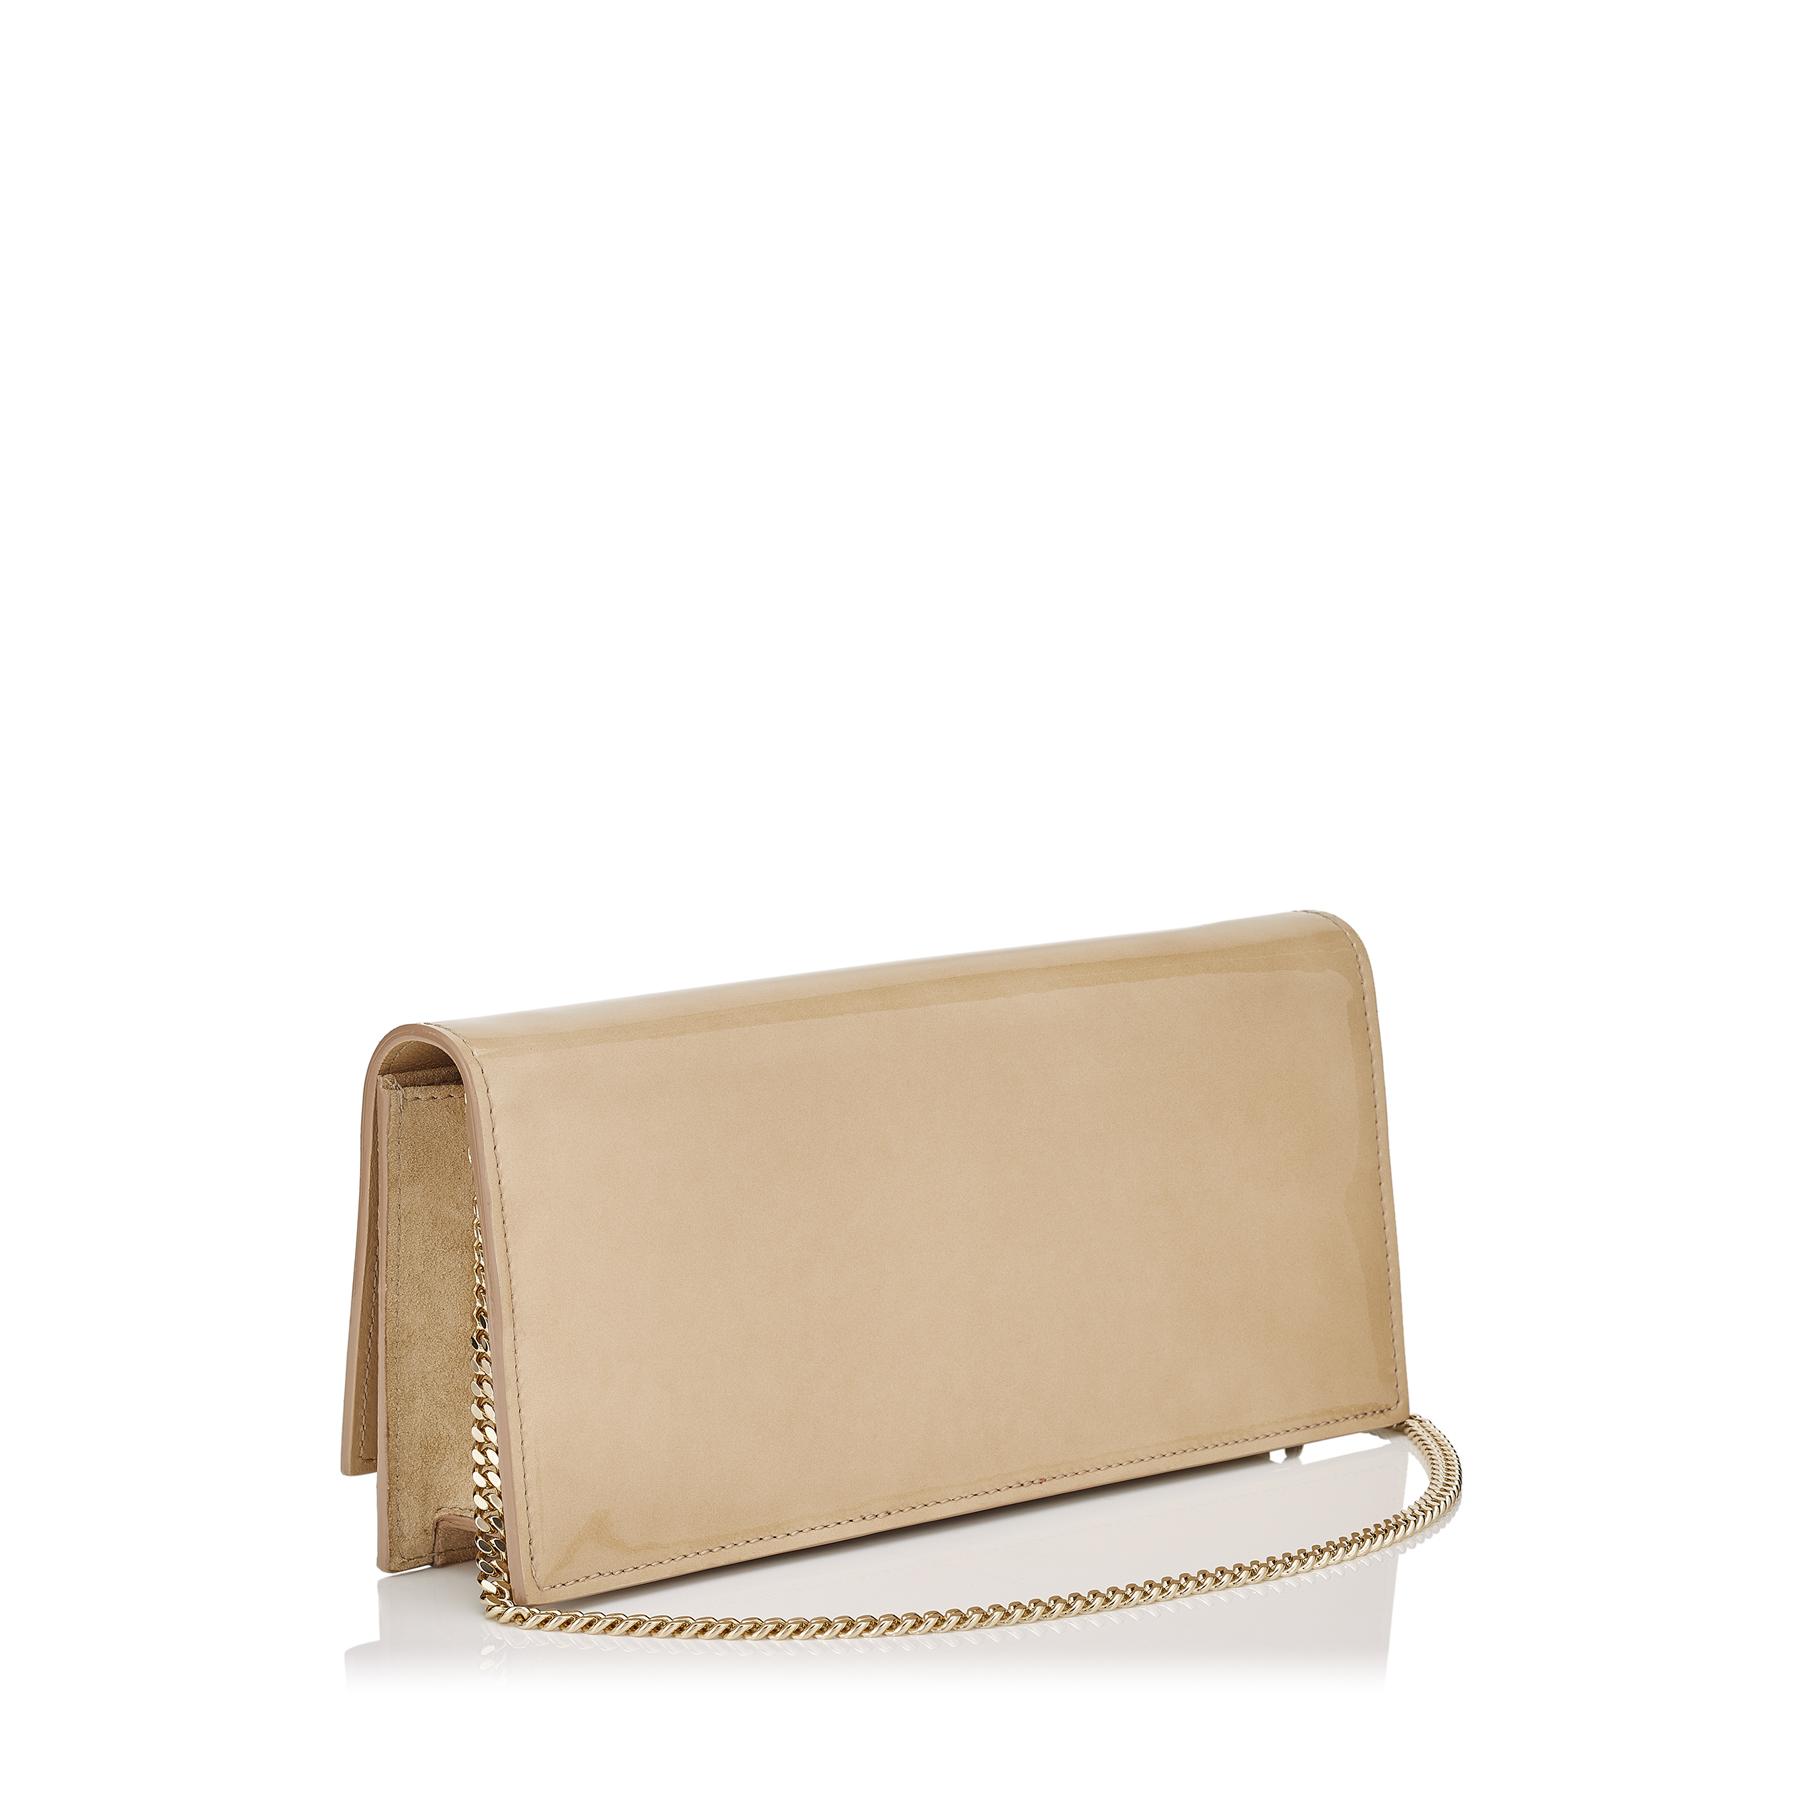 Jimmy Choo Fie Nude Patent And Suede Clutch Bag in Natural | Lyst UK